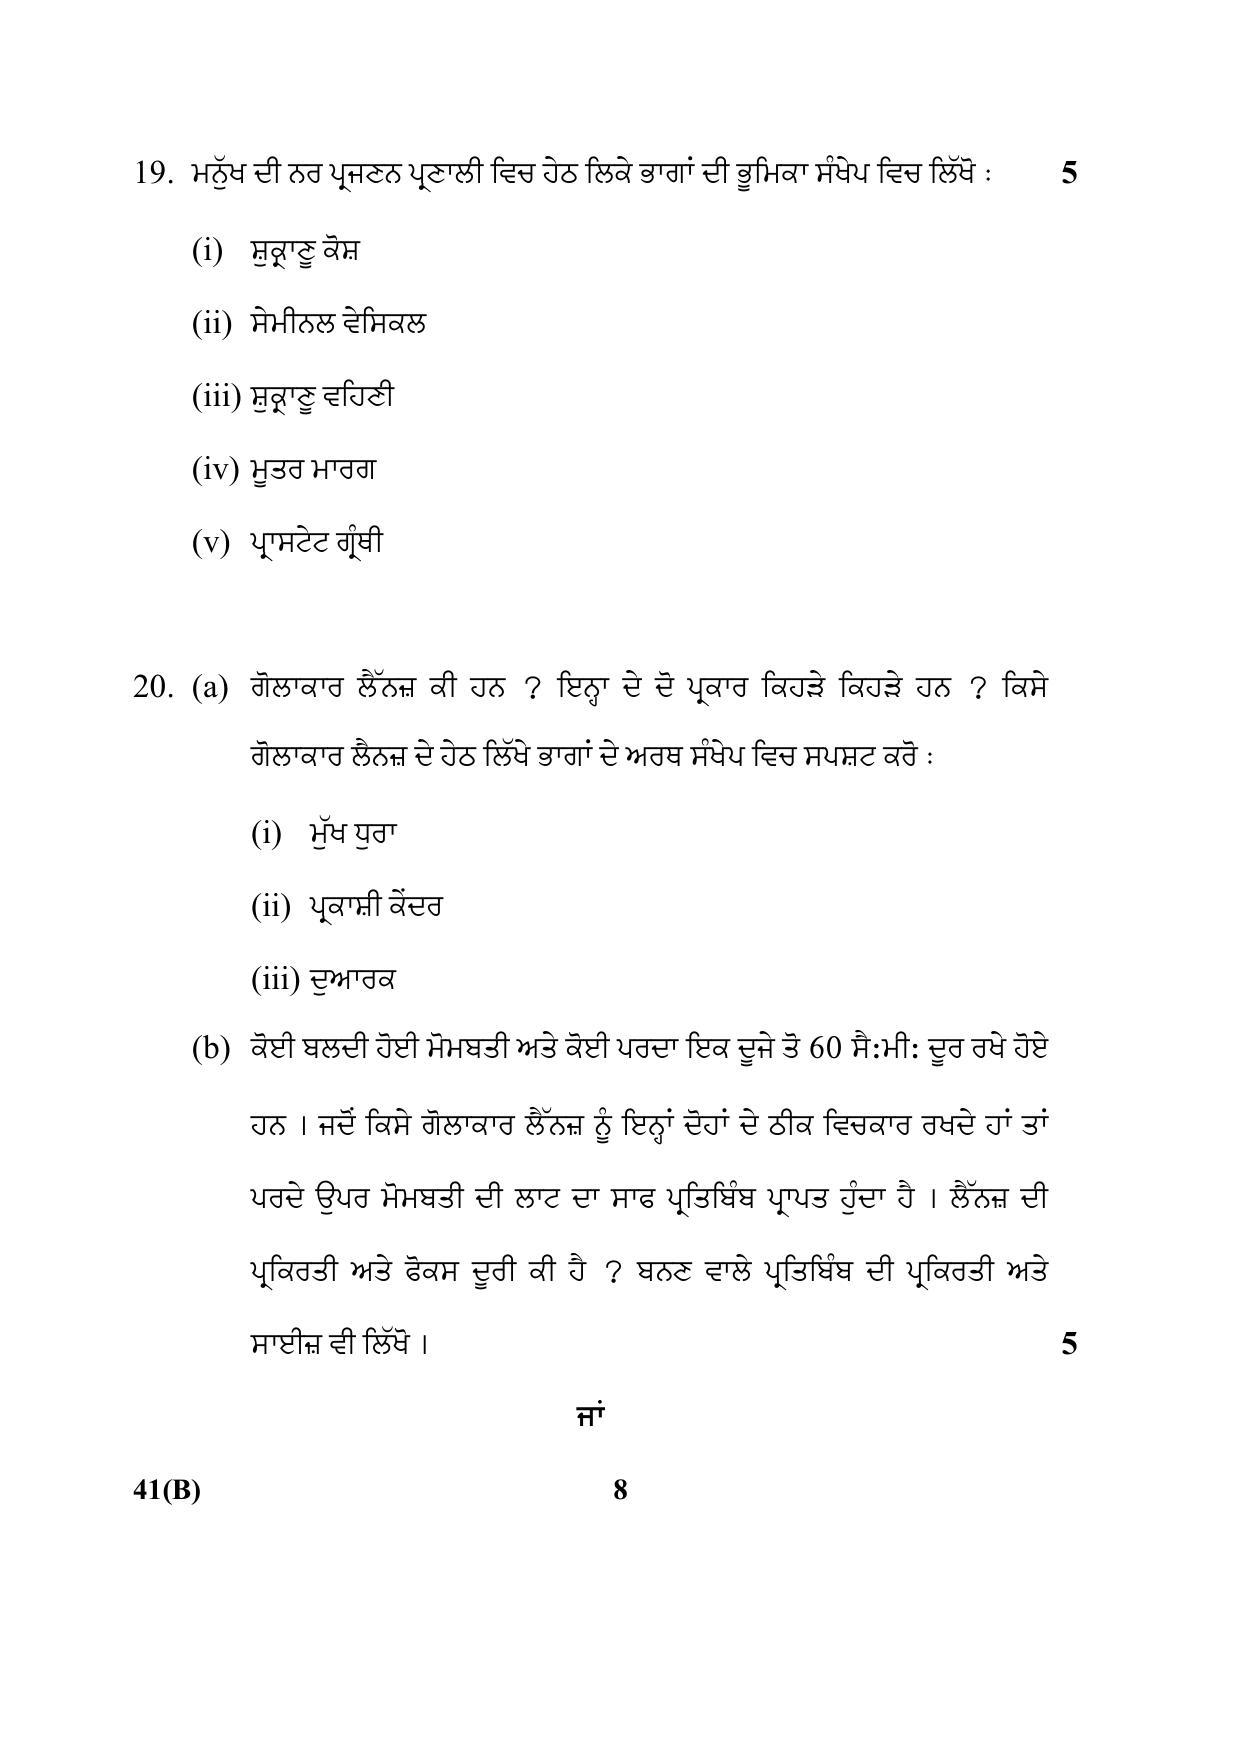 CBSE Class 10 41(B) (Science) For Blind_Punjabi 2018 Question Paper - Page 8